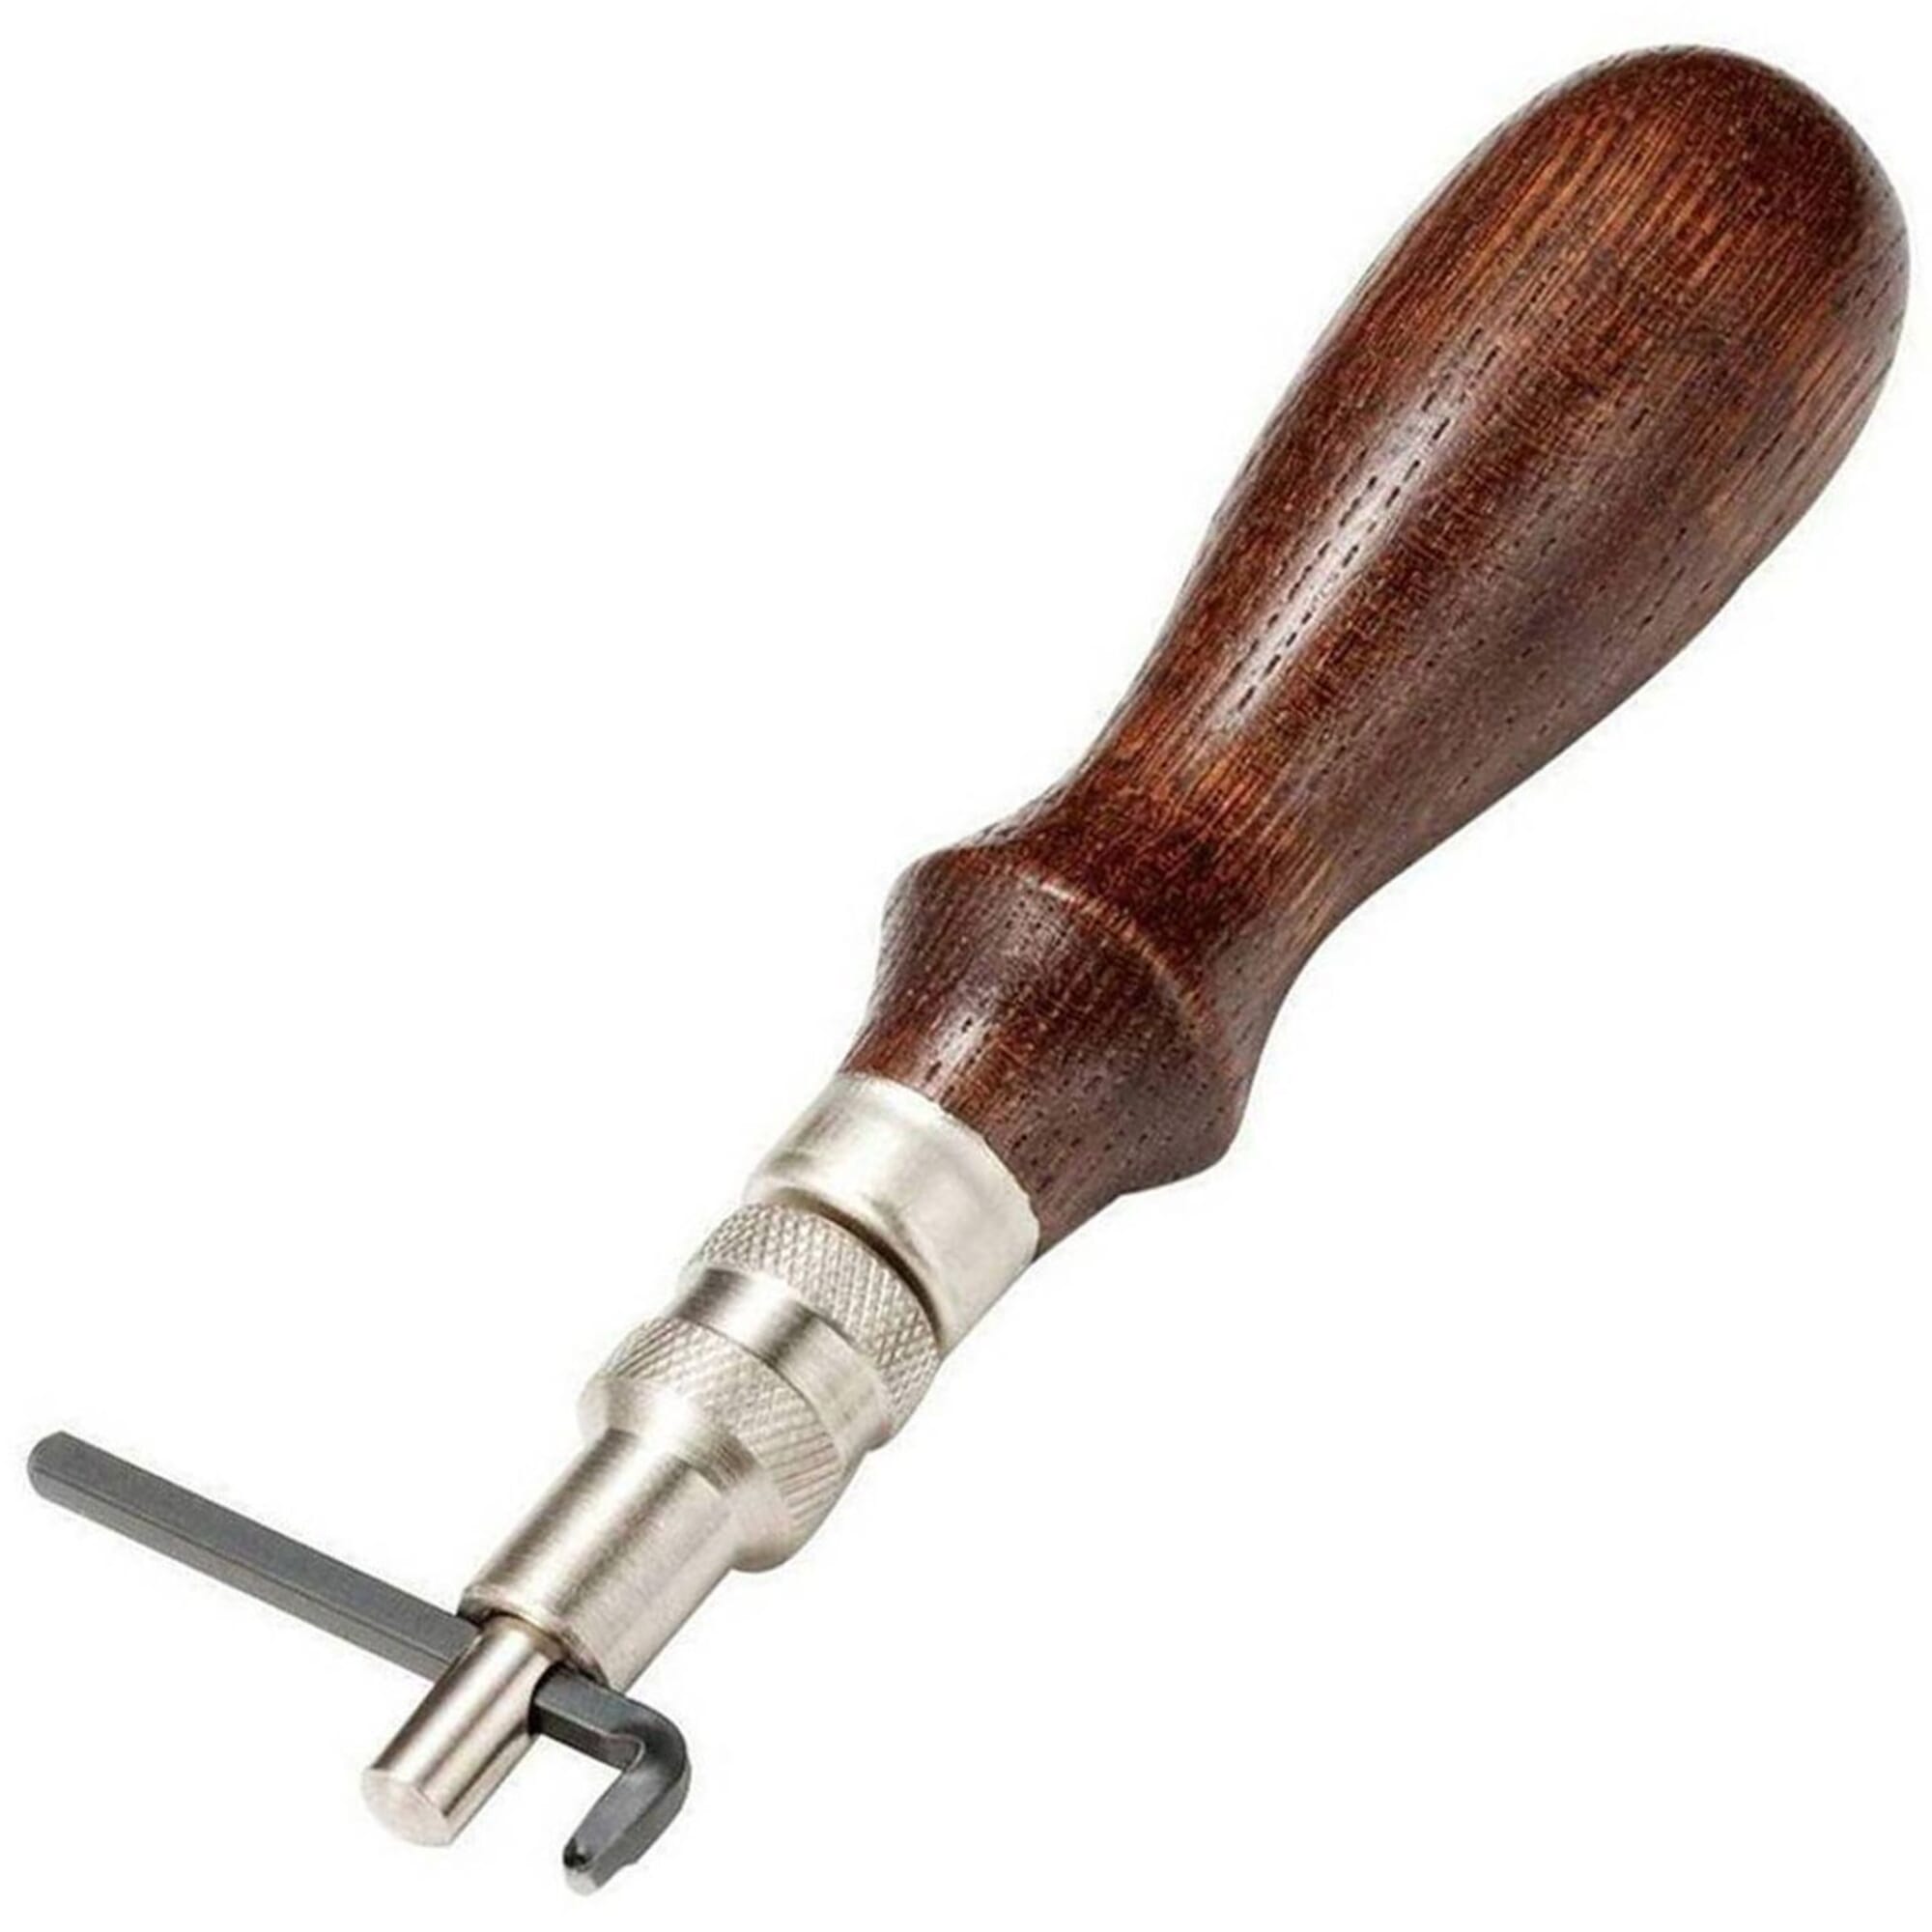 5 In 1 Leather Stitching Groover, High Stability Wooden Handle